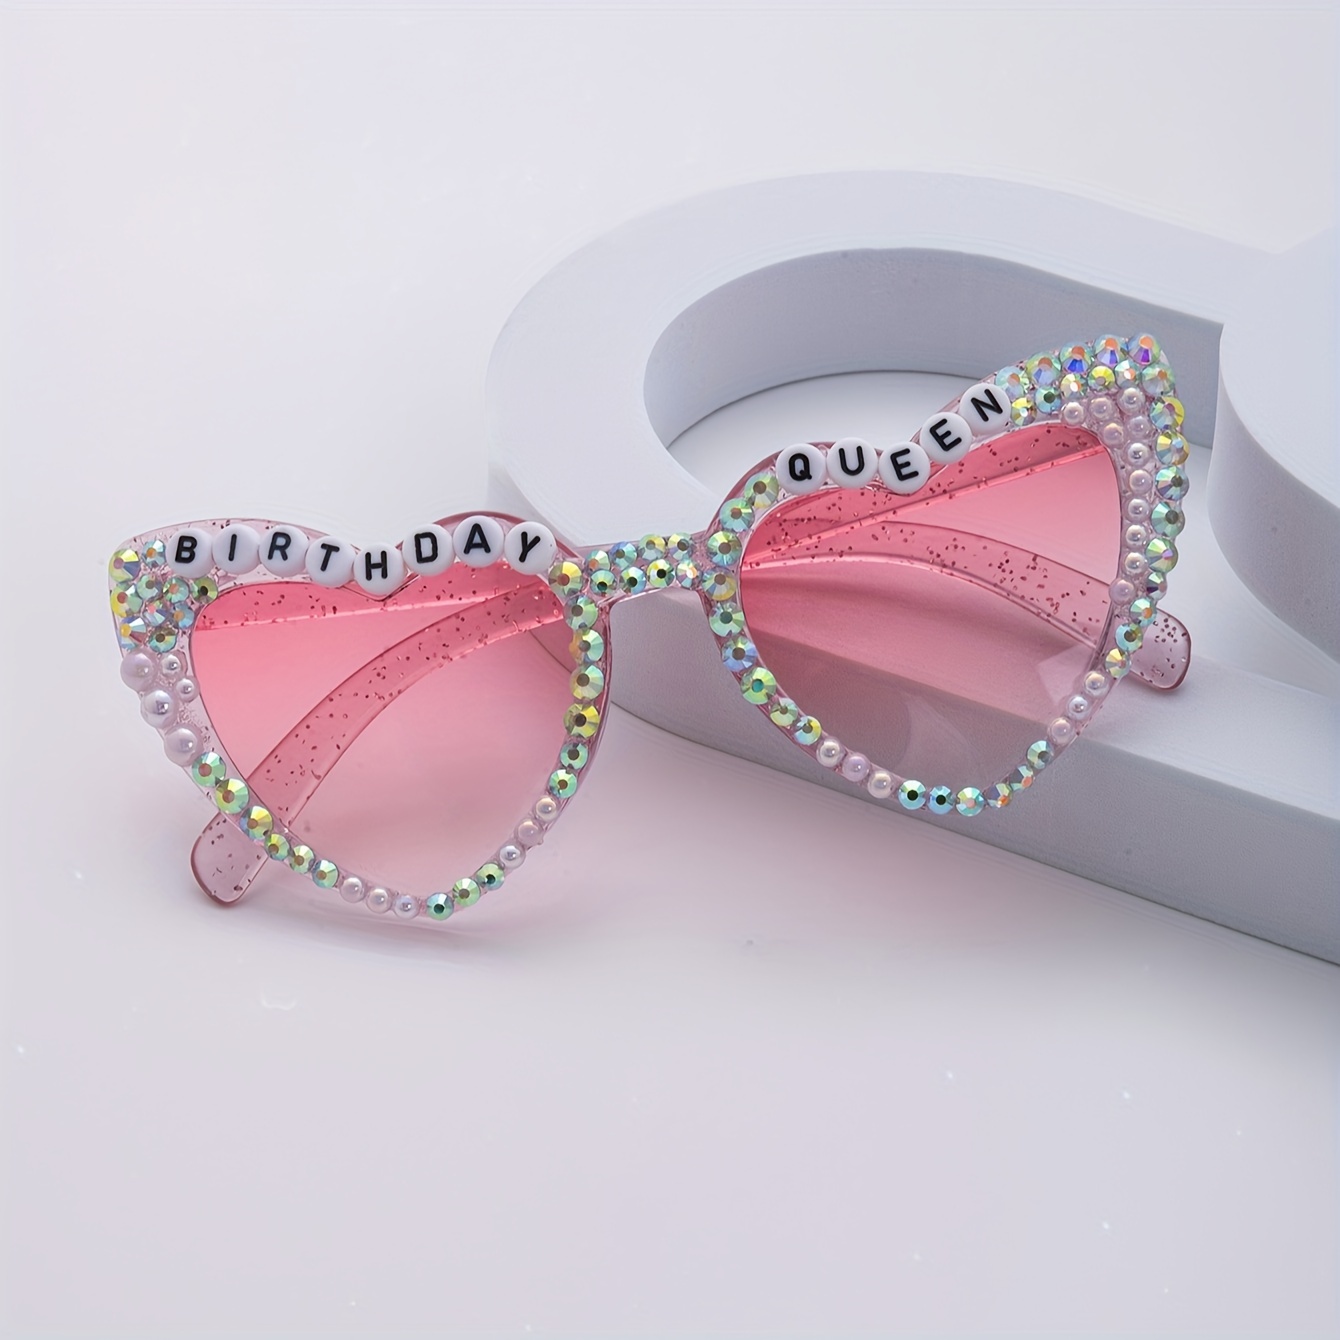 

New Heart-shaped Glasses Birthday Queen Colorful Rhinestone And Pearl Birthday Party Glasses For Music Festival